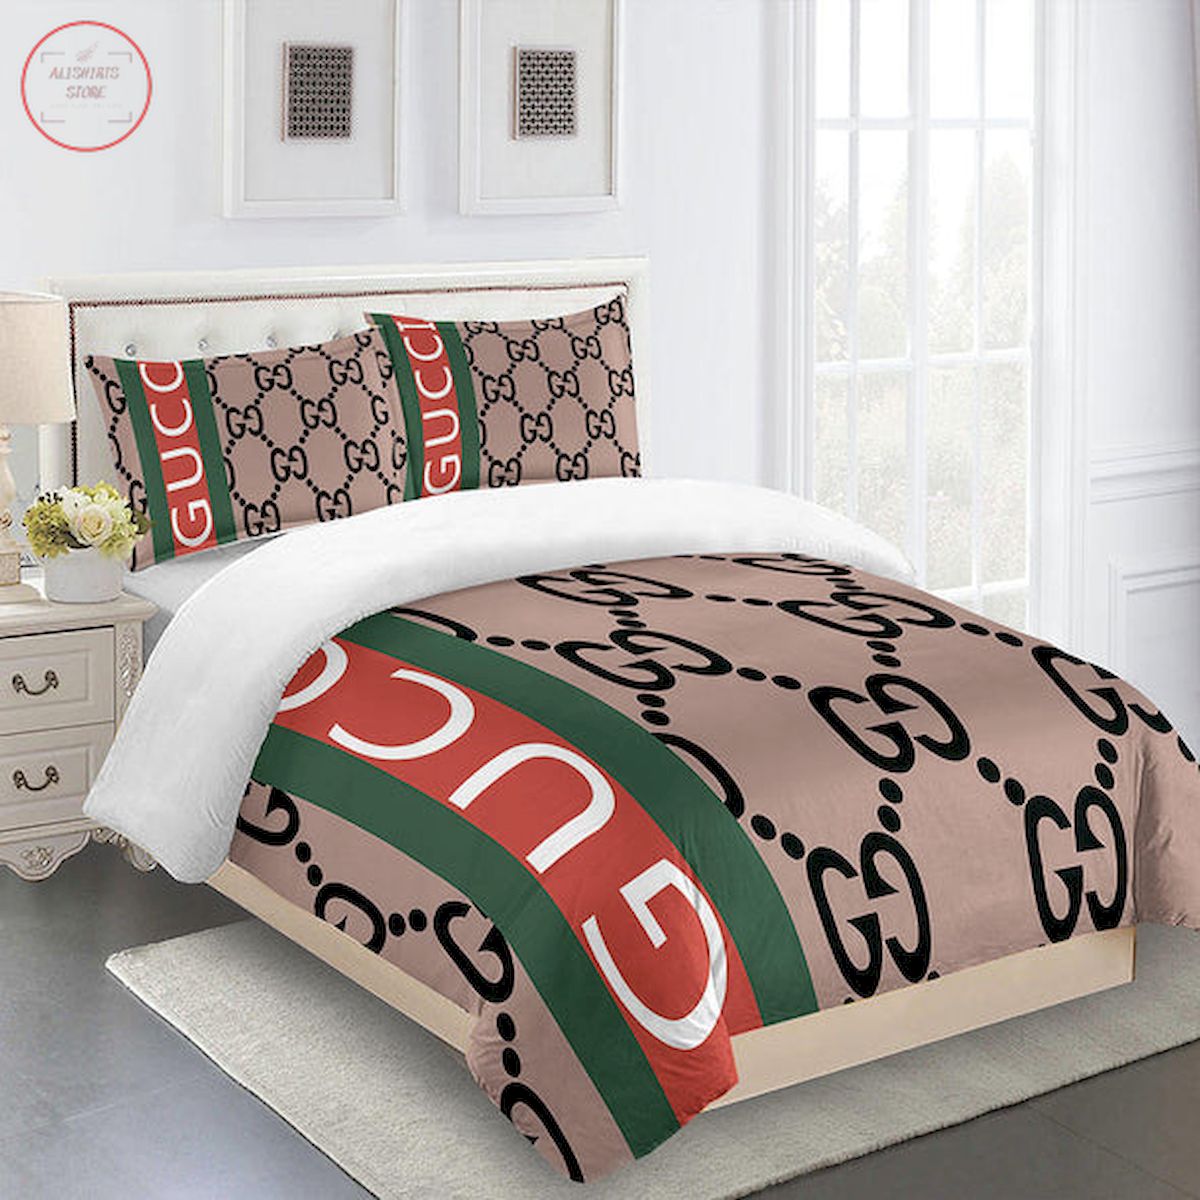 Gucci bedding set beige red green Luxury bed sheets